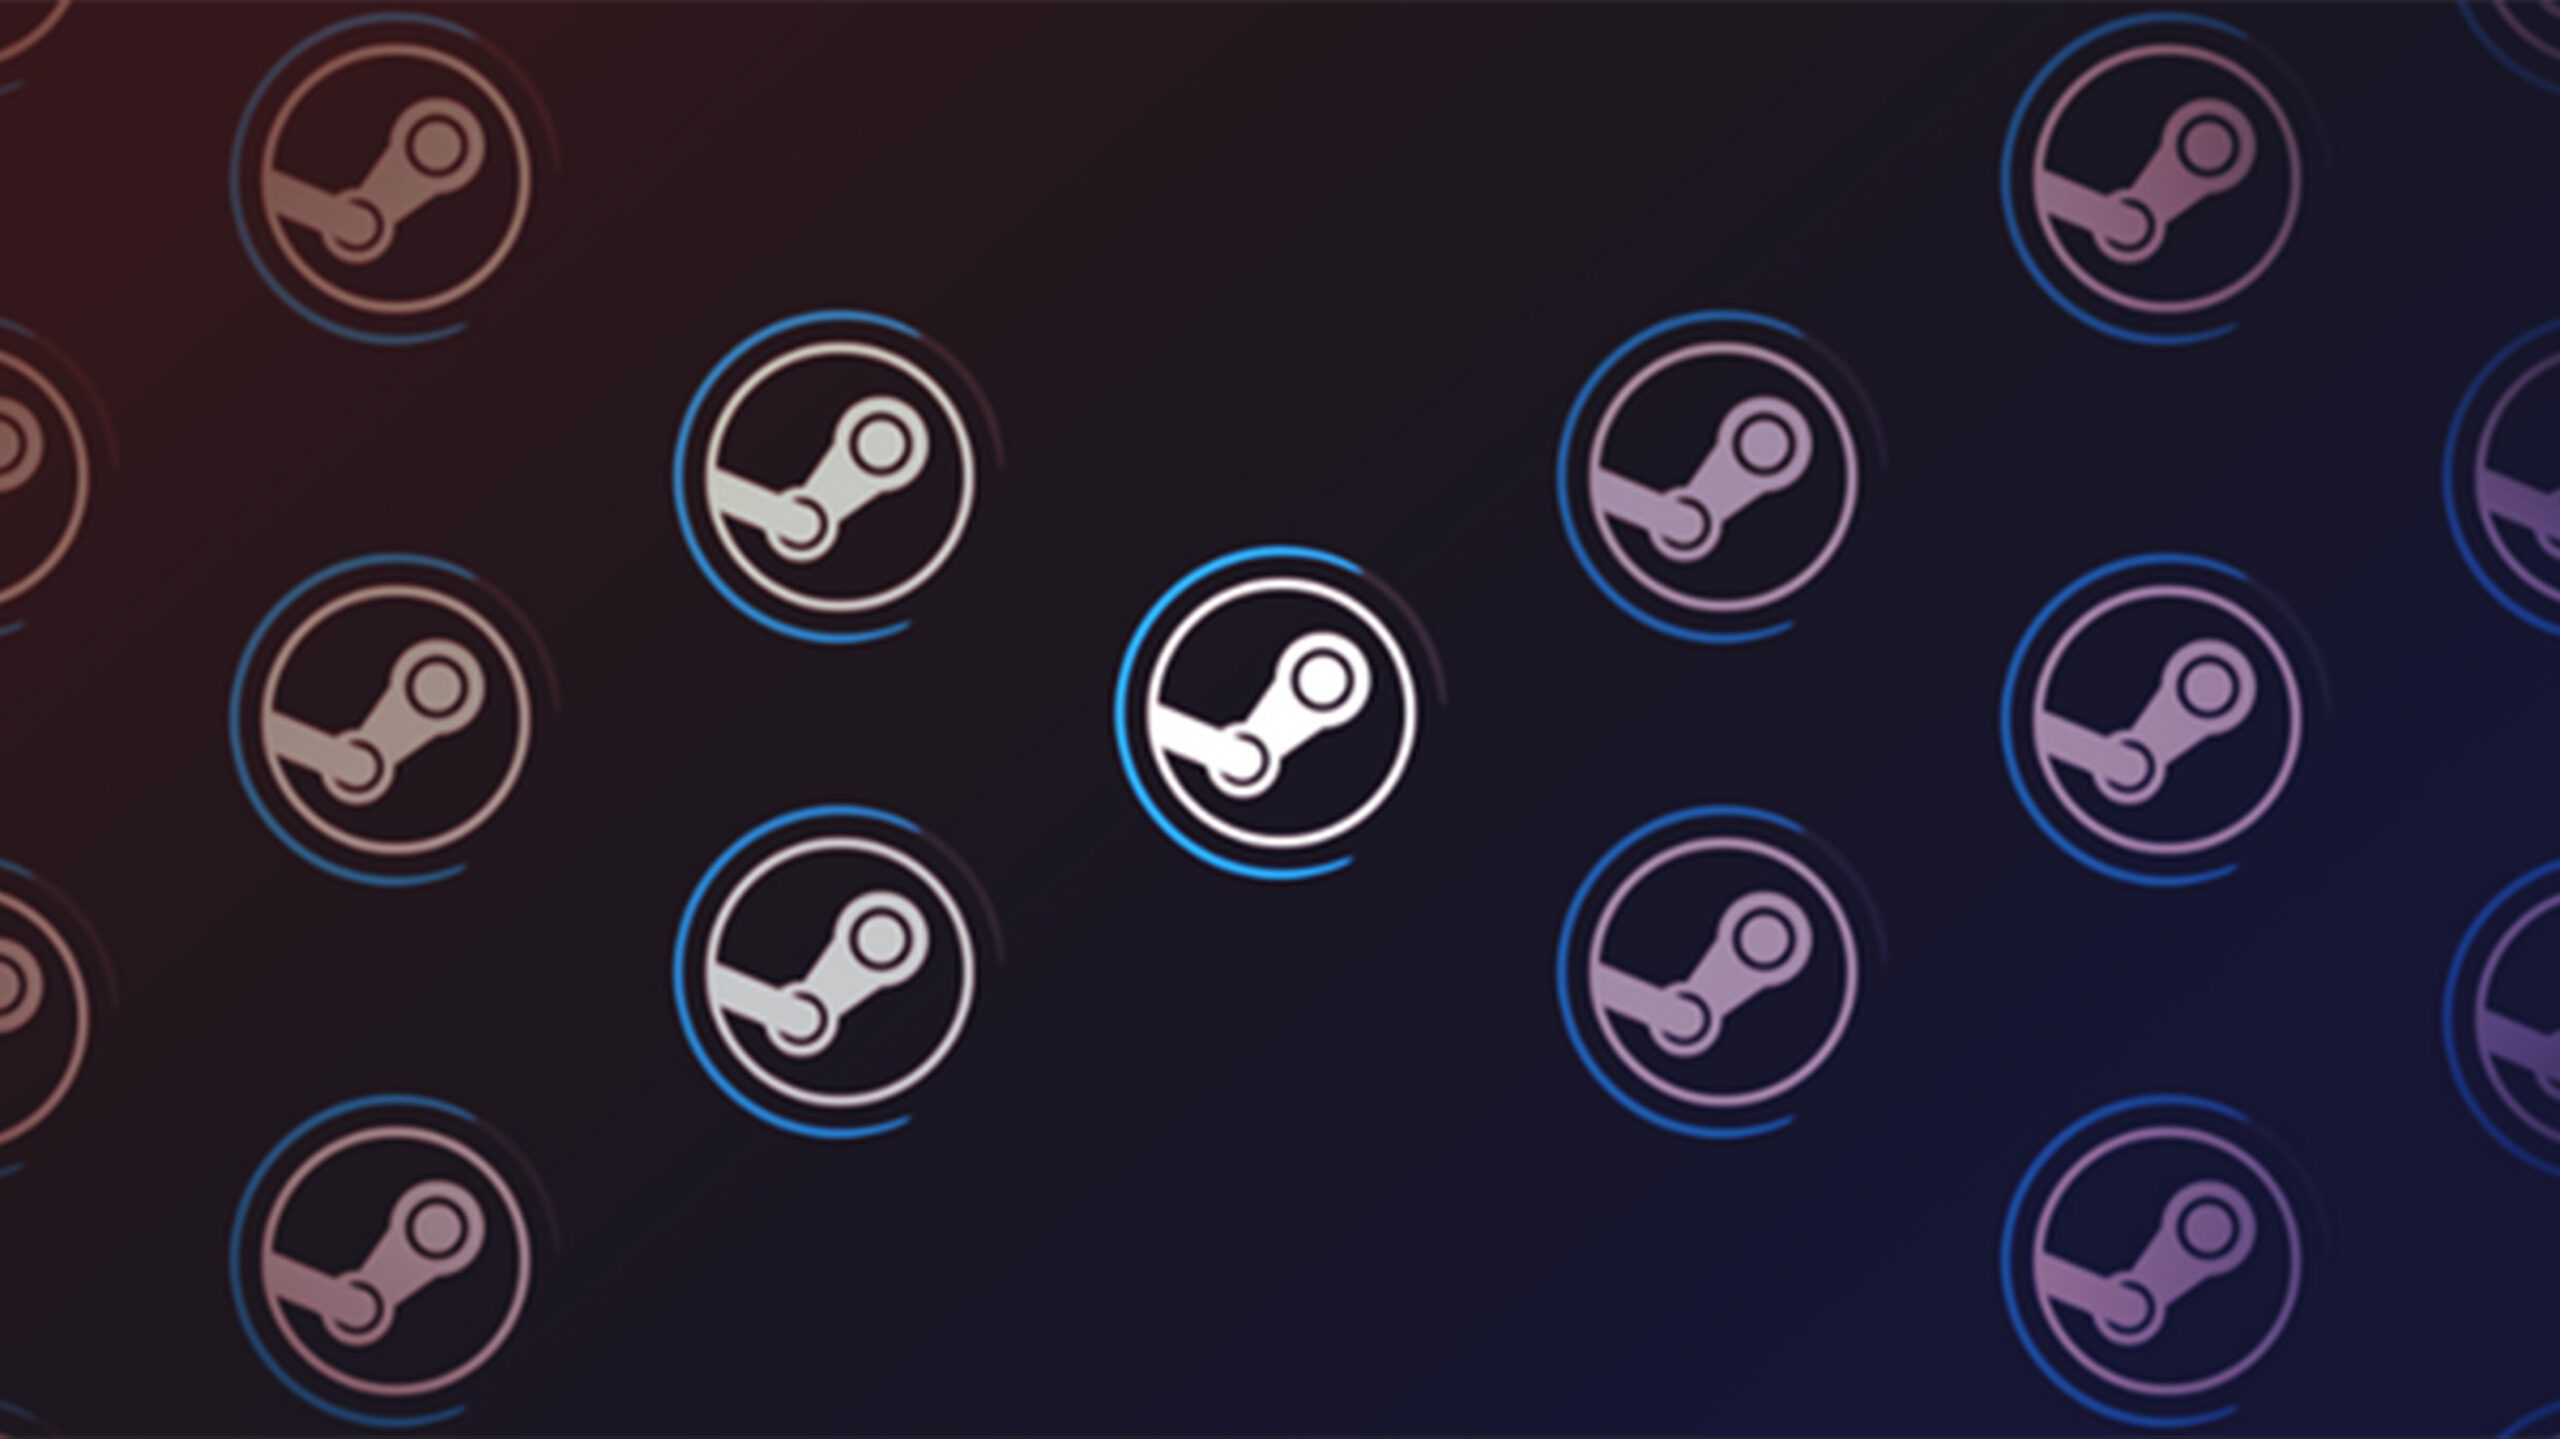 Valve announces that Steam is getting a makeover and some new